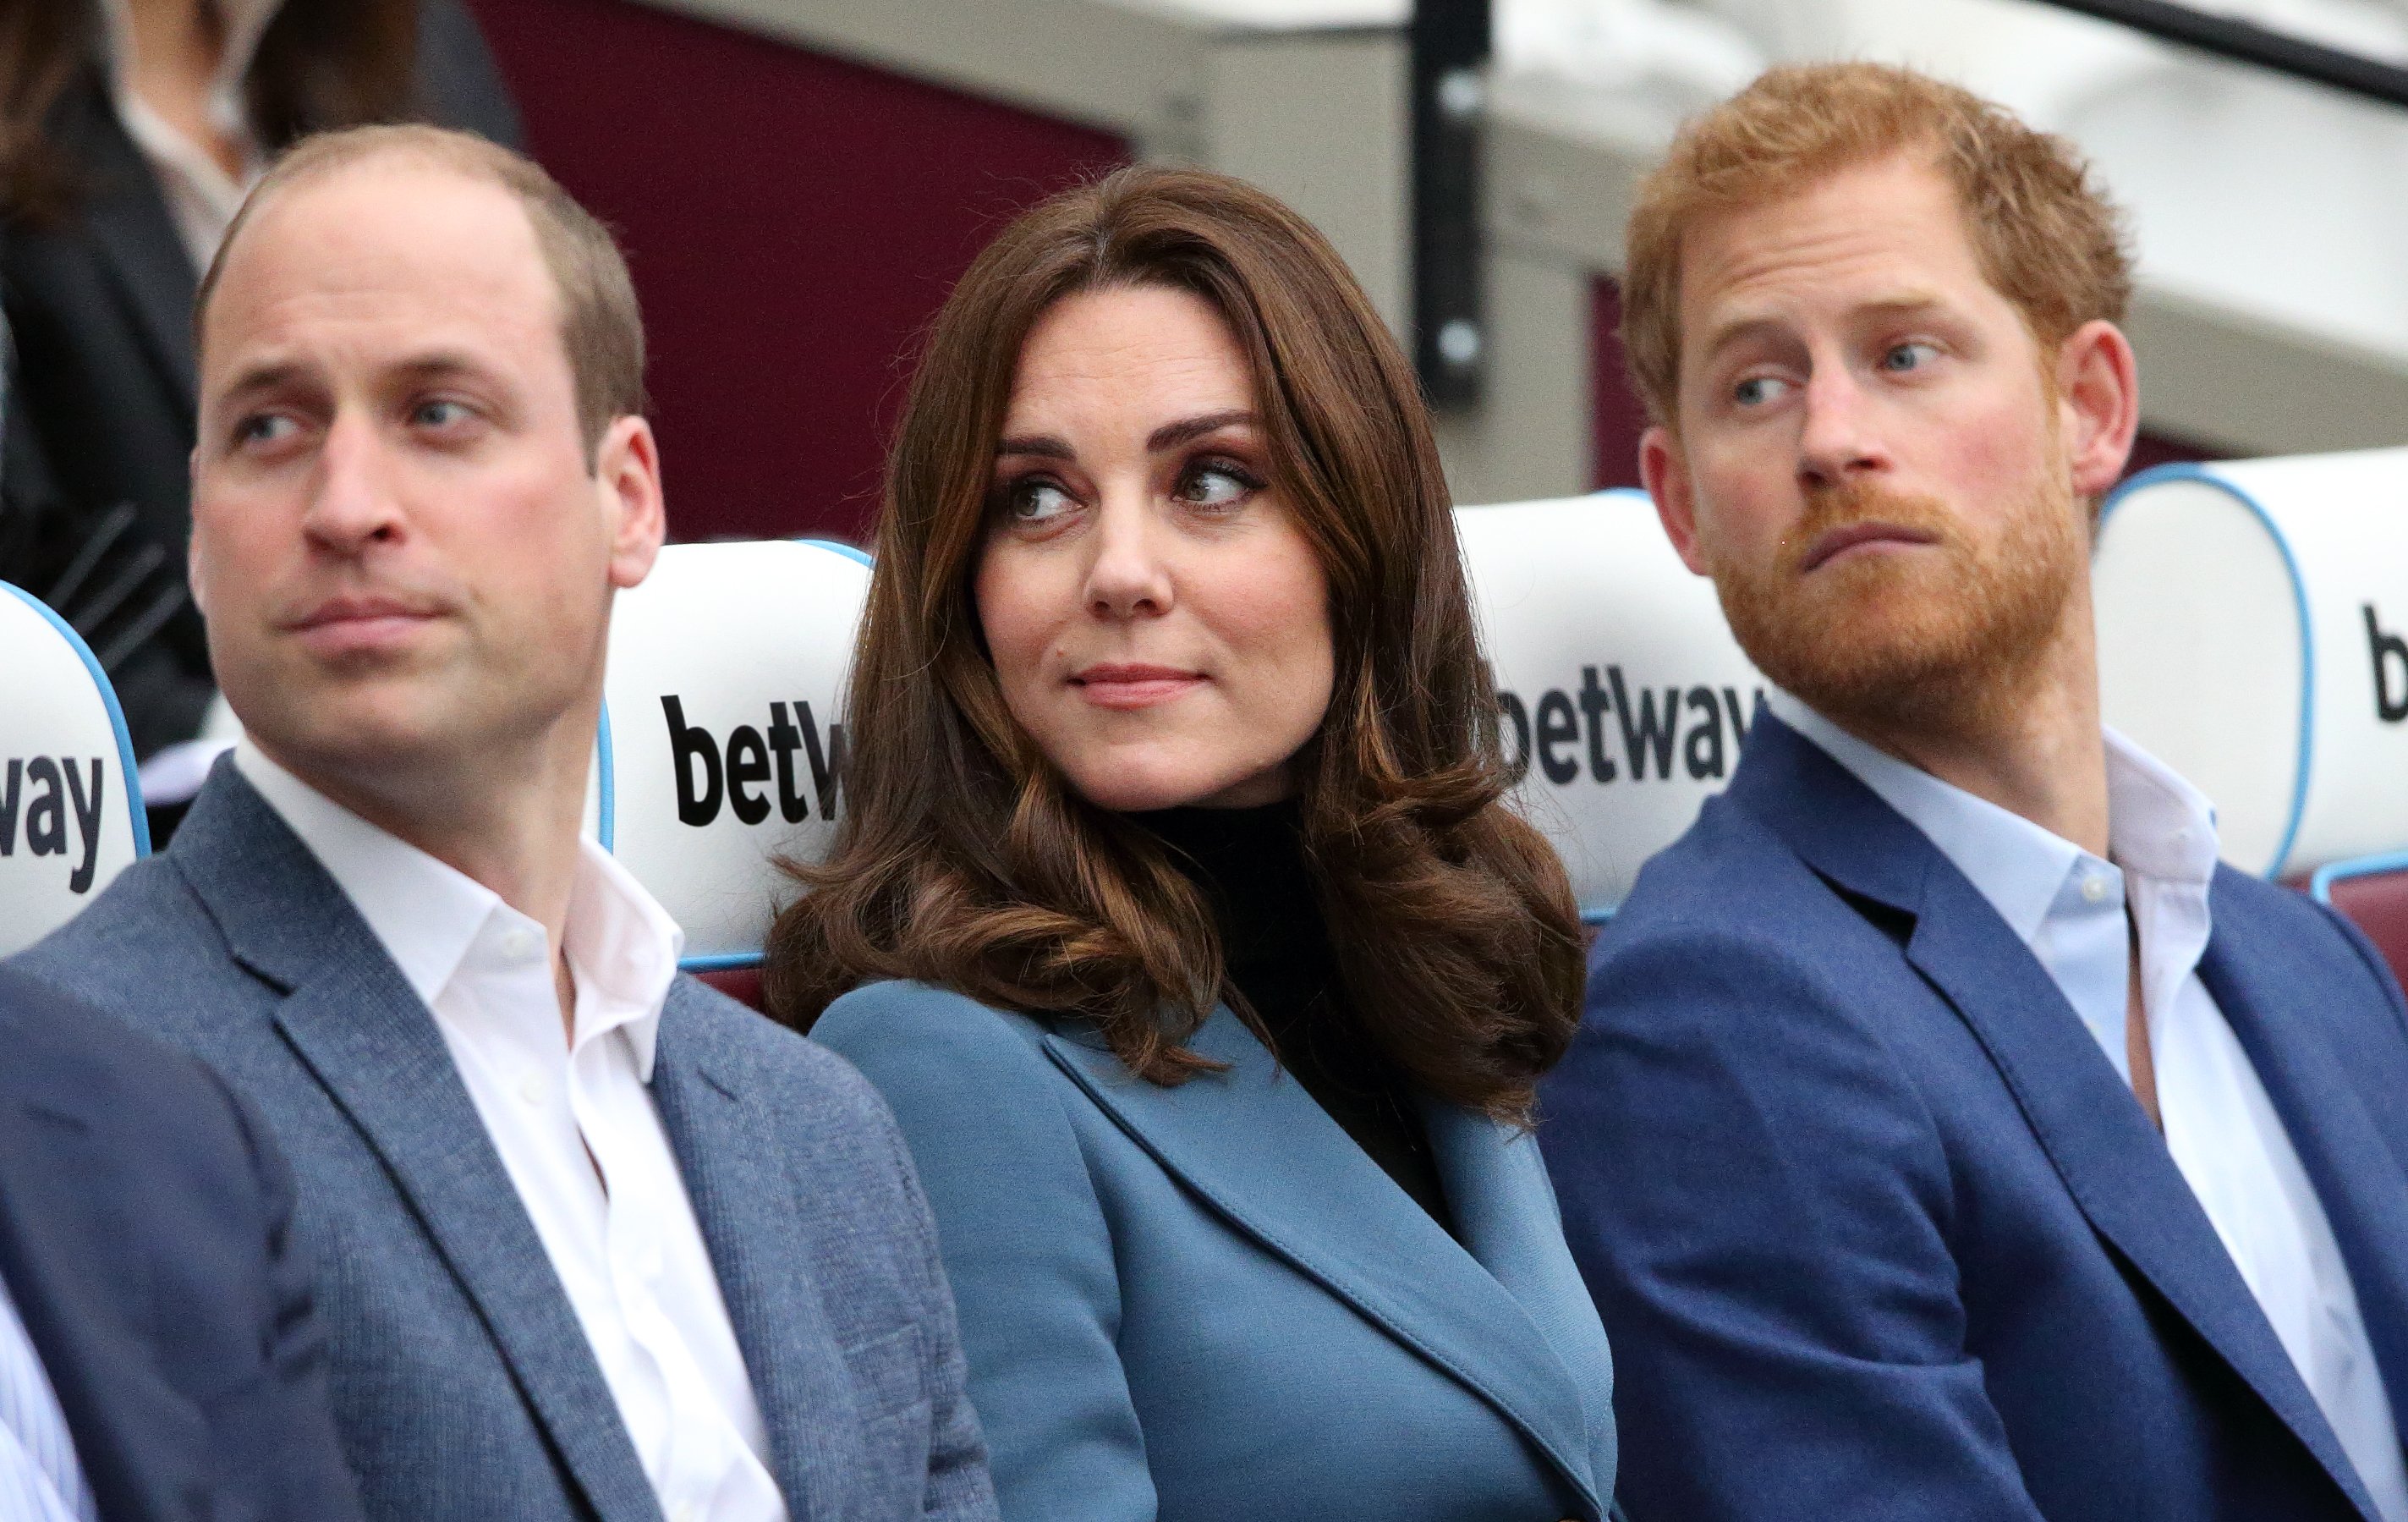 Prince William, Kate Middleton and Prince Harry during the Coach Core graduation ceremony at The London Stadium on October 18, 2017 in London, England. / Source: Getty Images